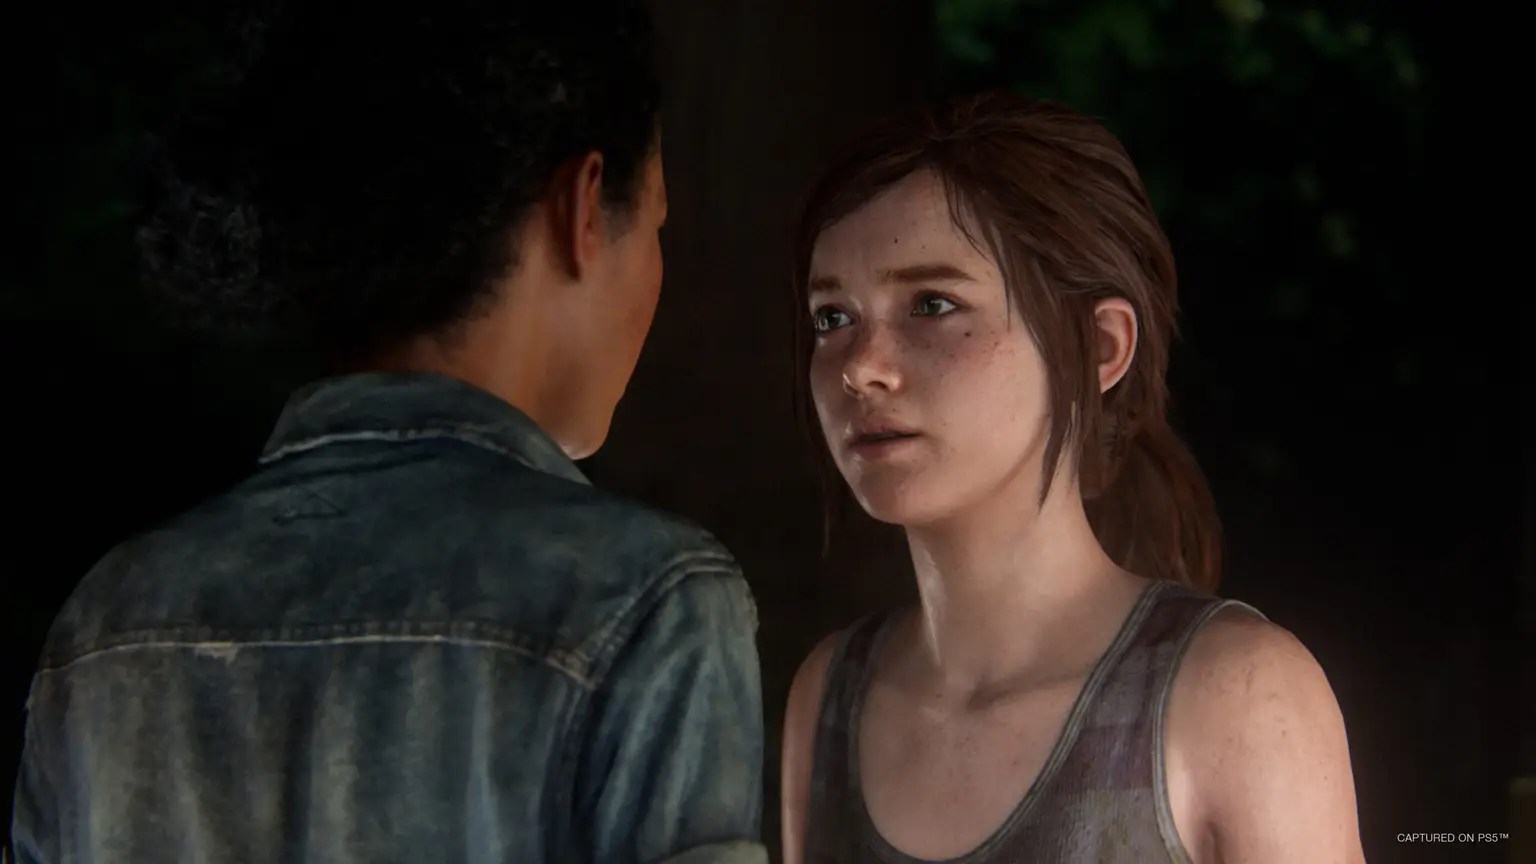 Not so Perfect - Ellie from The Last of Us 2 - v1.0 Showcase